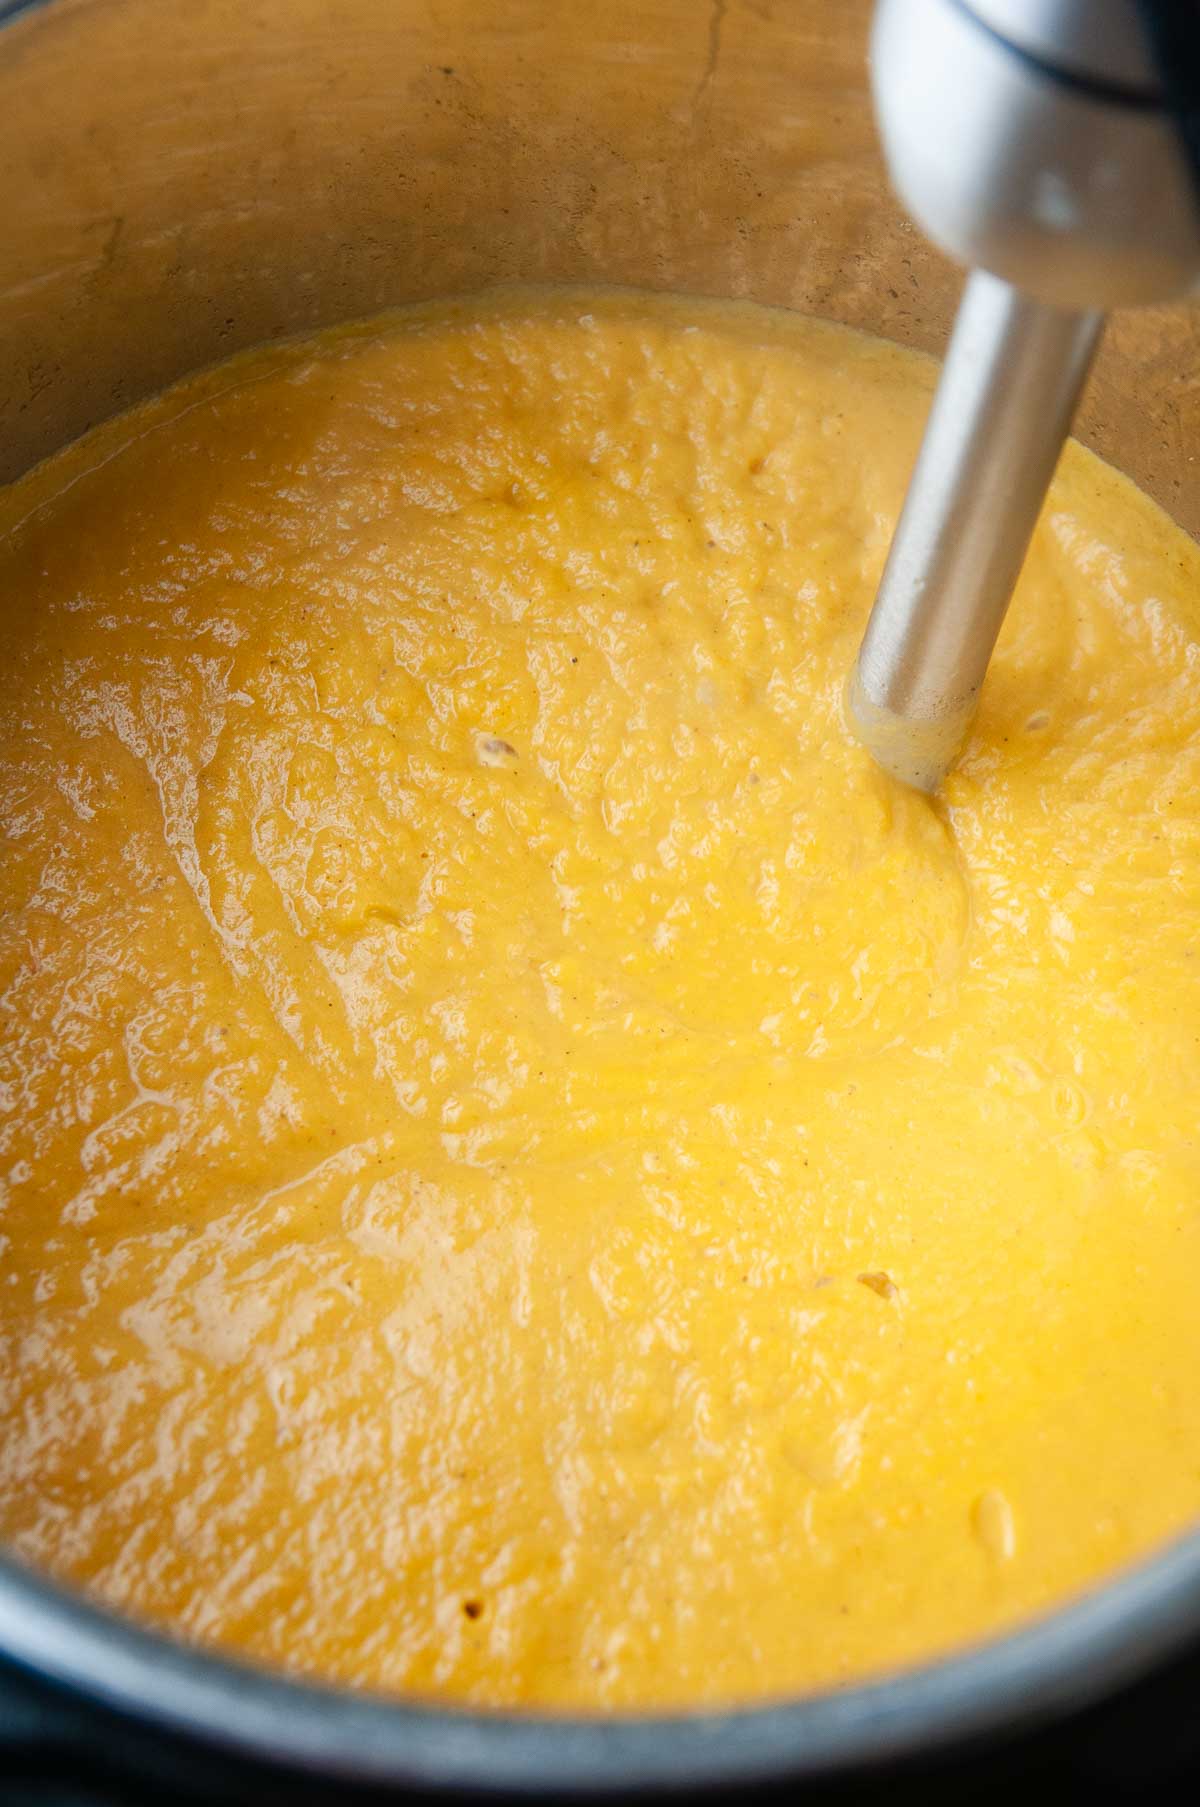 Puree the sweet potato and pumpkin soup with an immersion blender